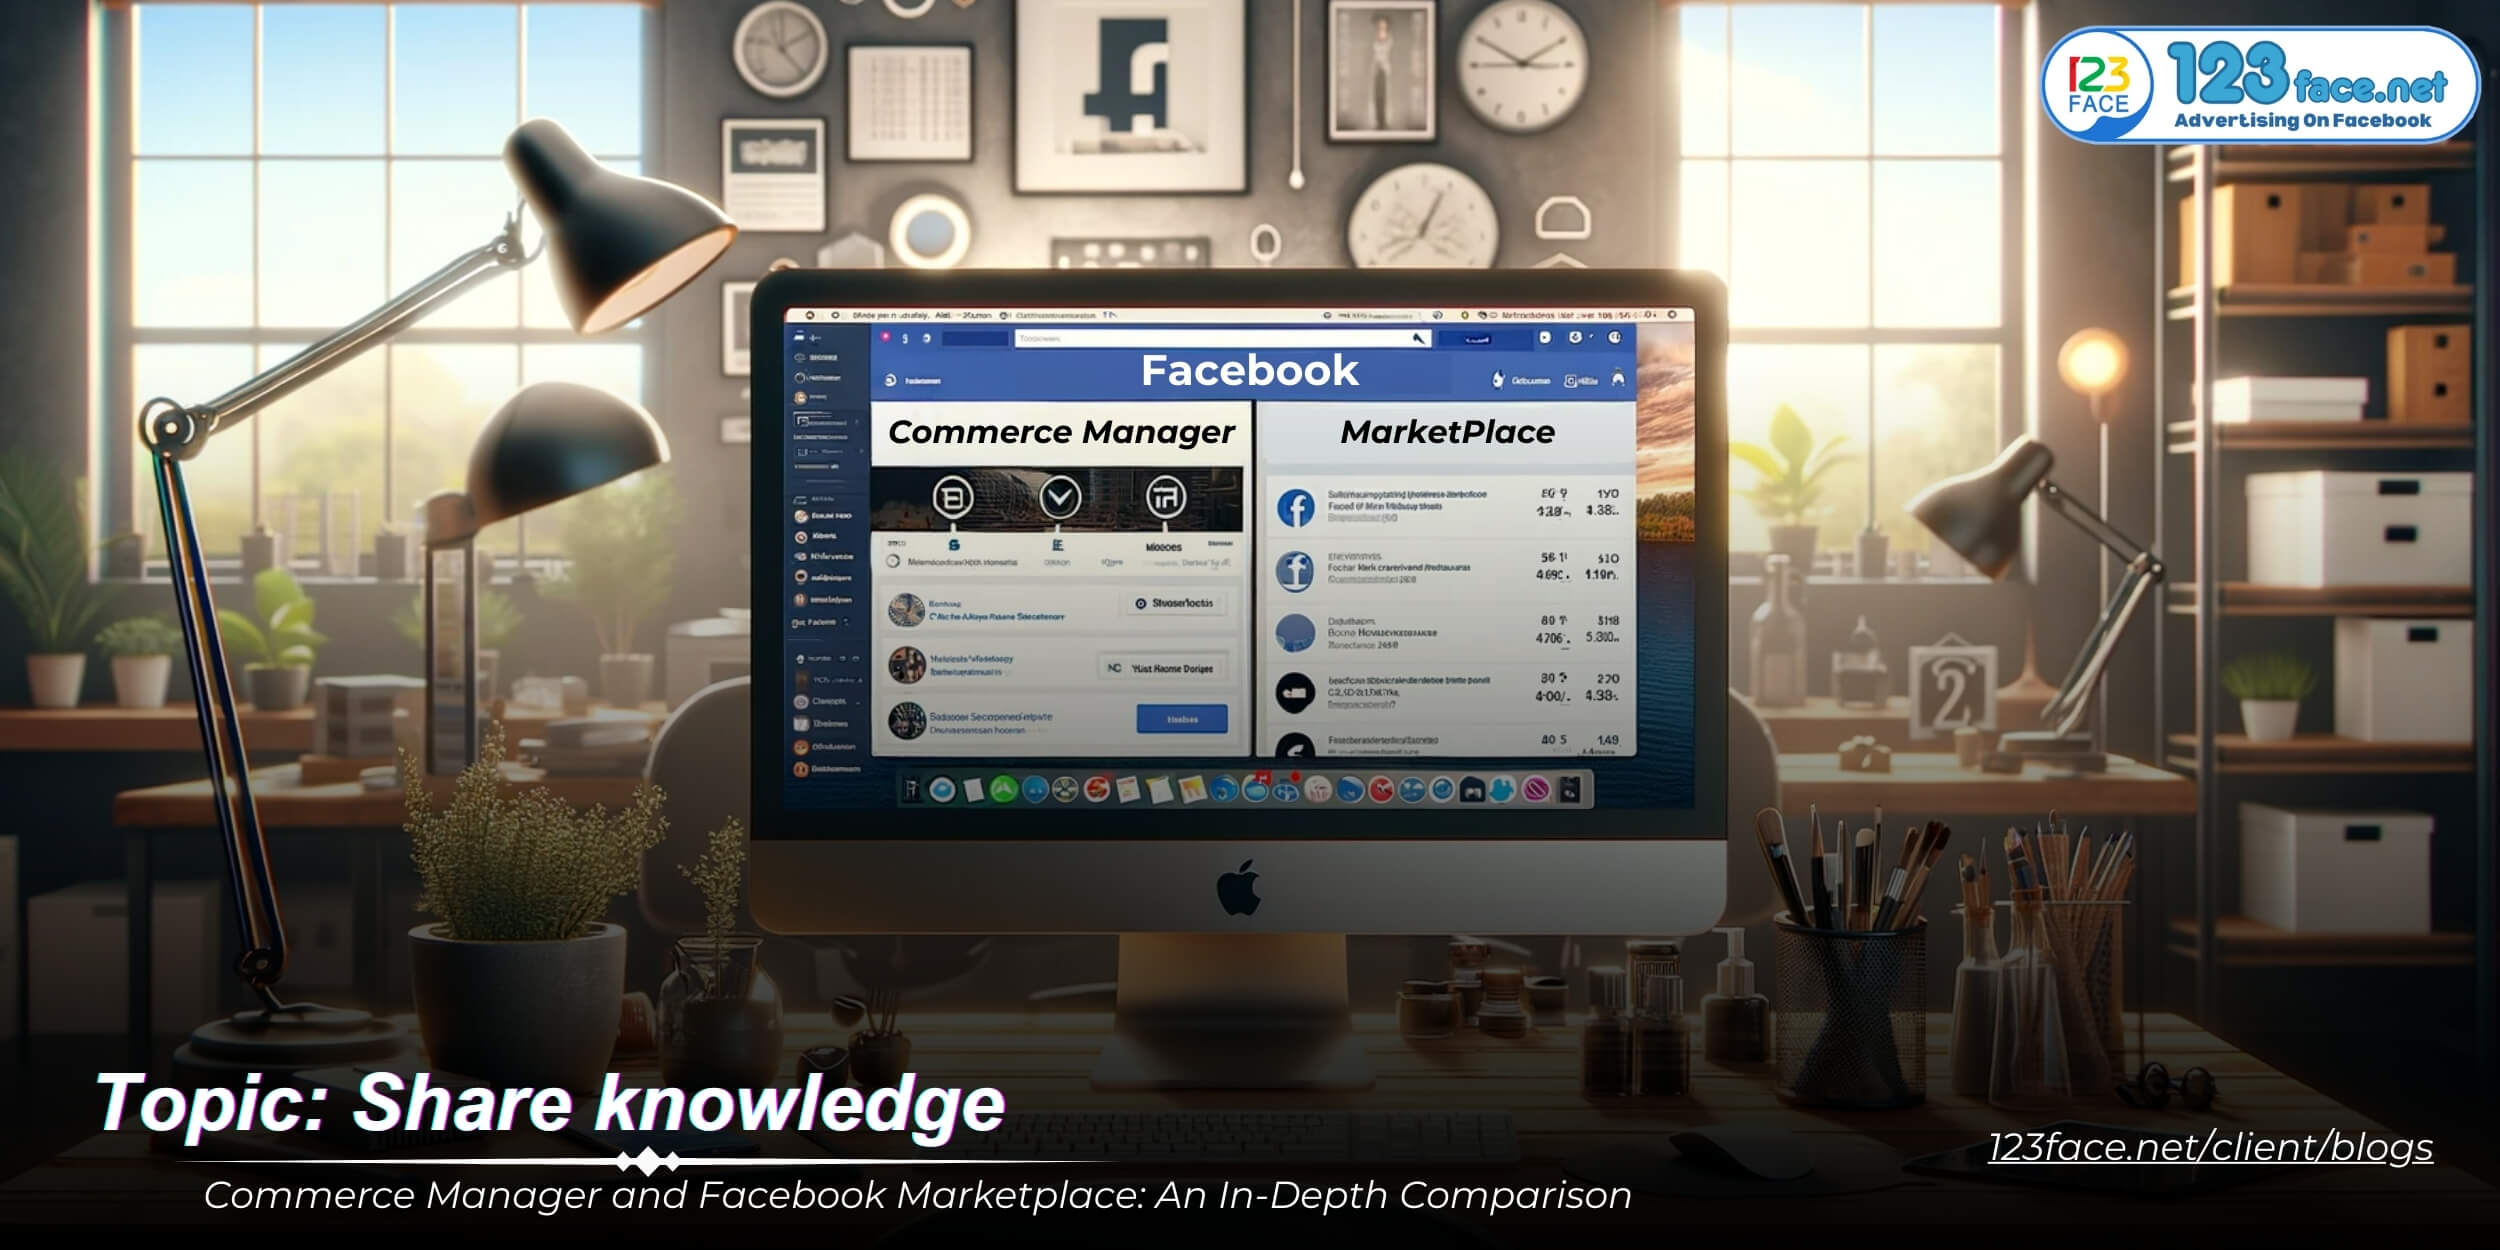 Commerce Manager and Facebook Marketplace: An In-Depth Comparison